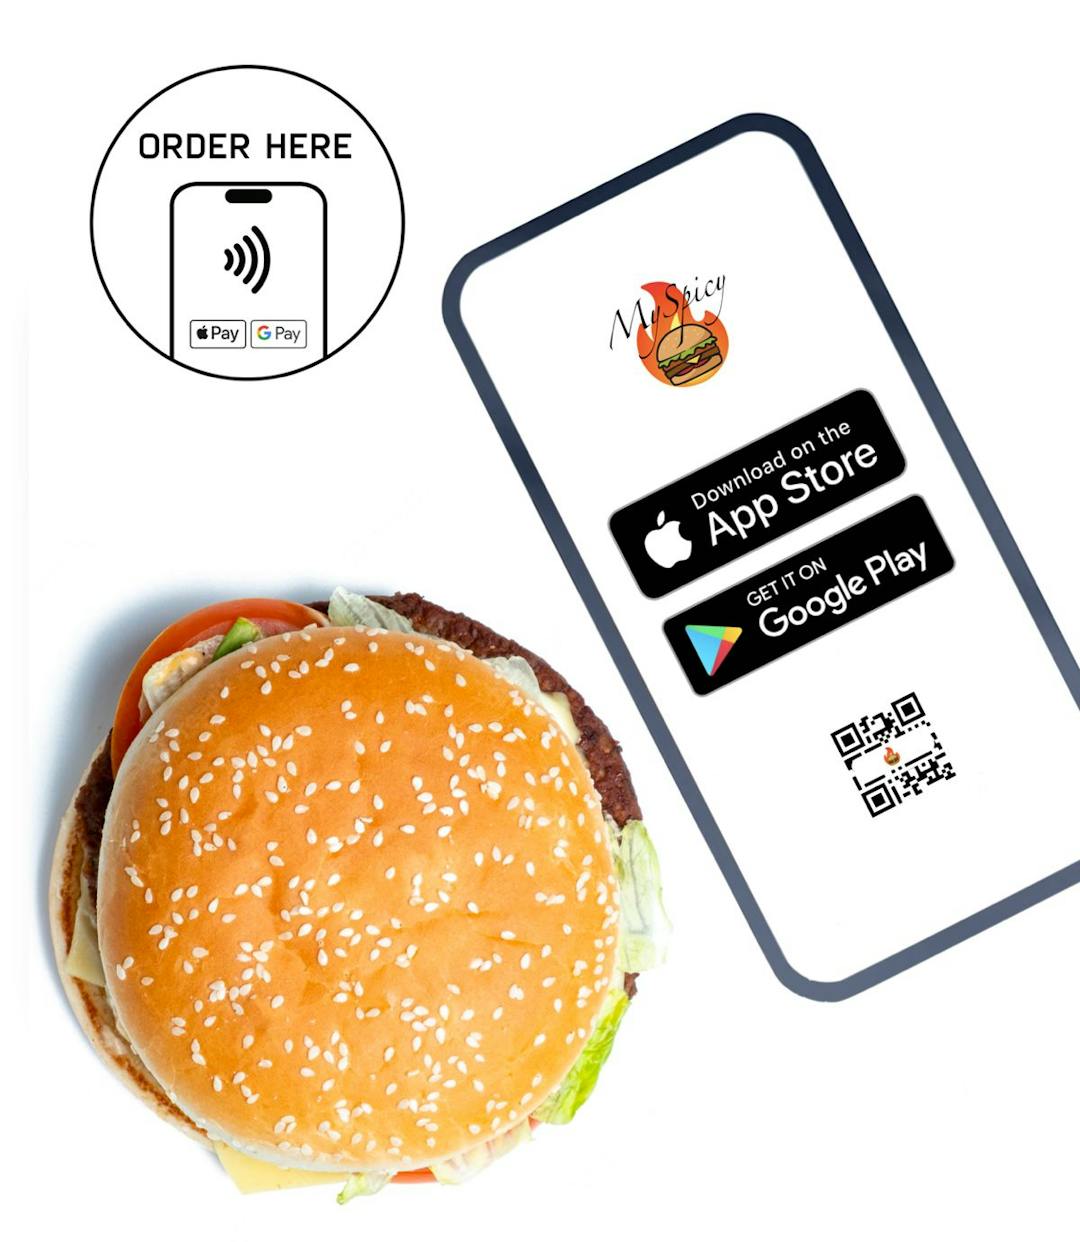 <h2 style="letter-spacing:-2px;line-height:70px;font-size:54px;font-weight:400;"> <span style="letter-spacing:-1px;">Easy NFC Ordering</span> with <strong>Orda Tap</strong></h2>